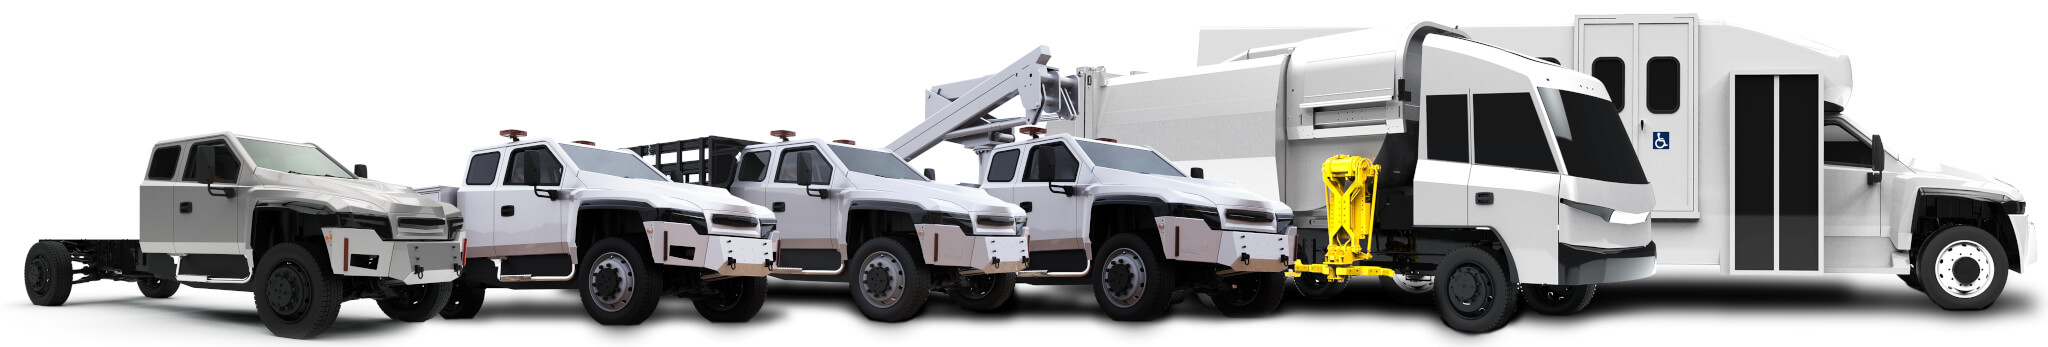 Applications for the Zeus Electric Vocational Truck Chassis